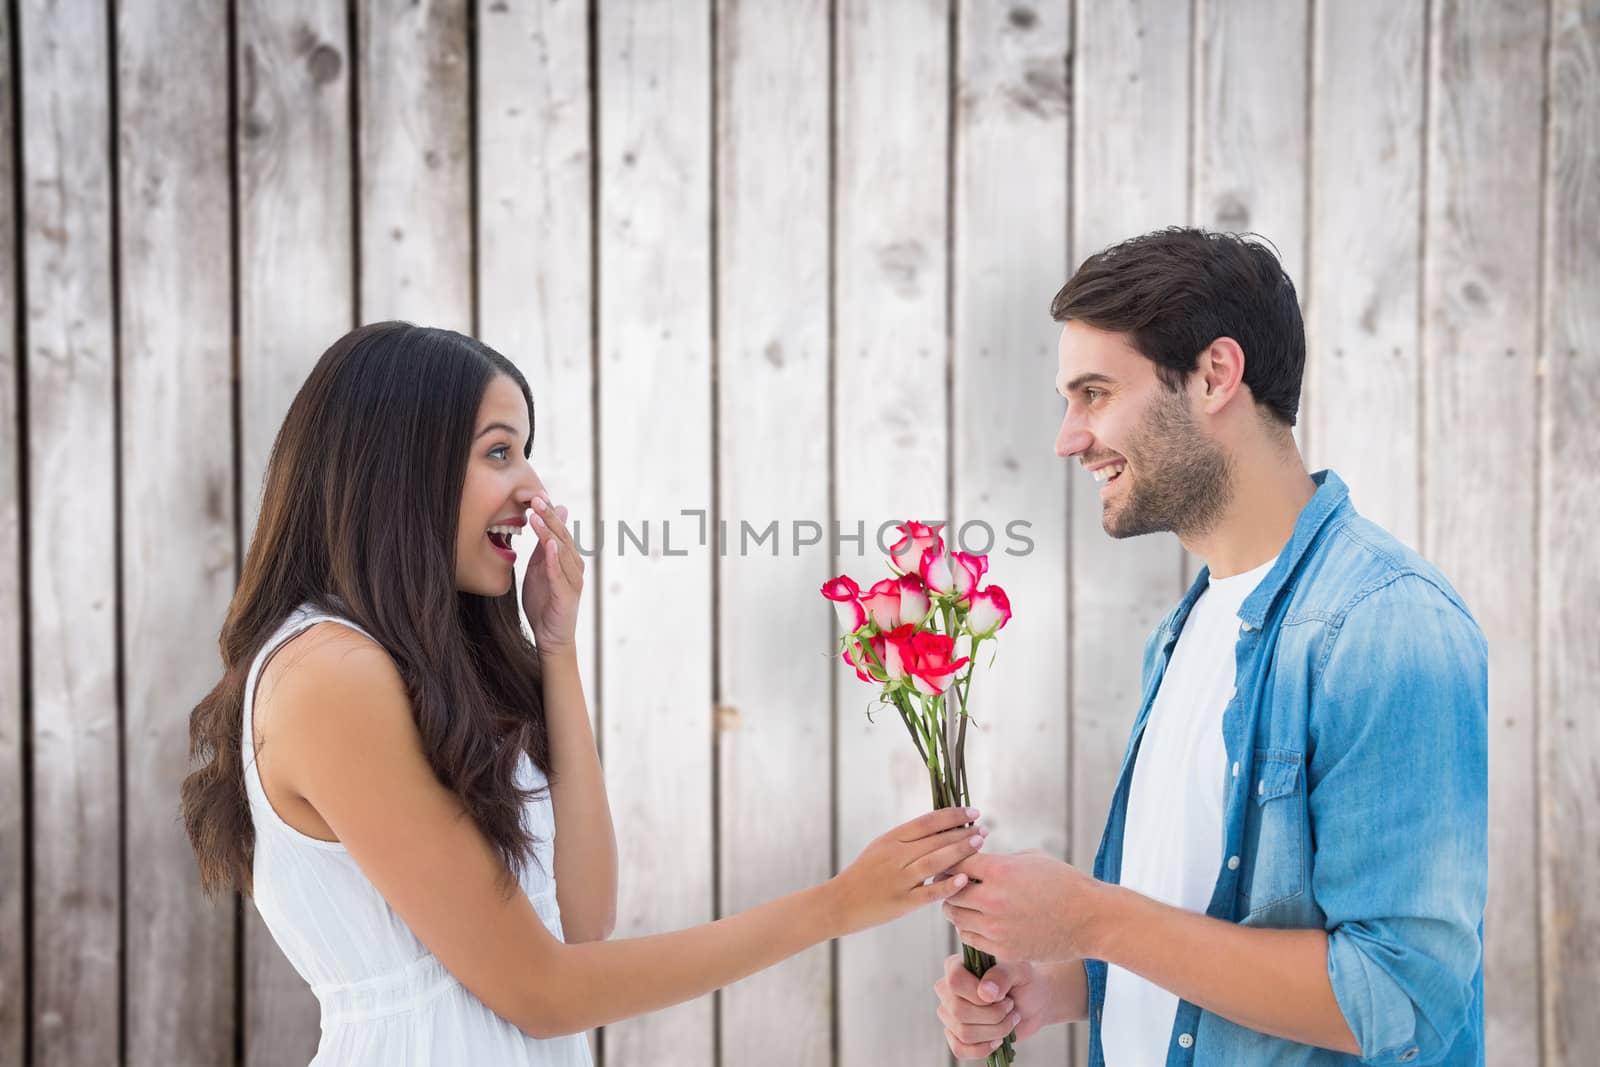 Happy hipster giving his girlfriend roses against wooden planks